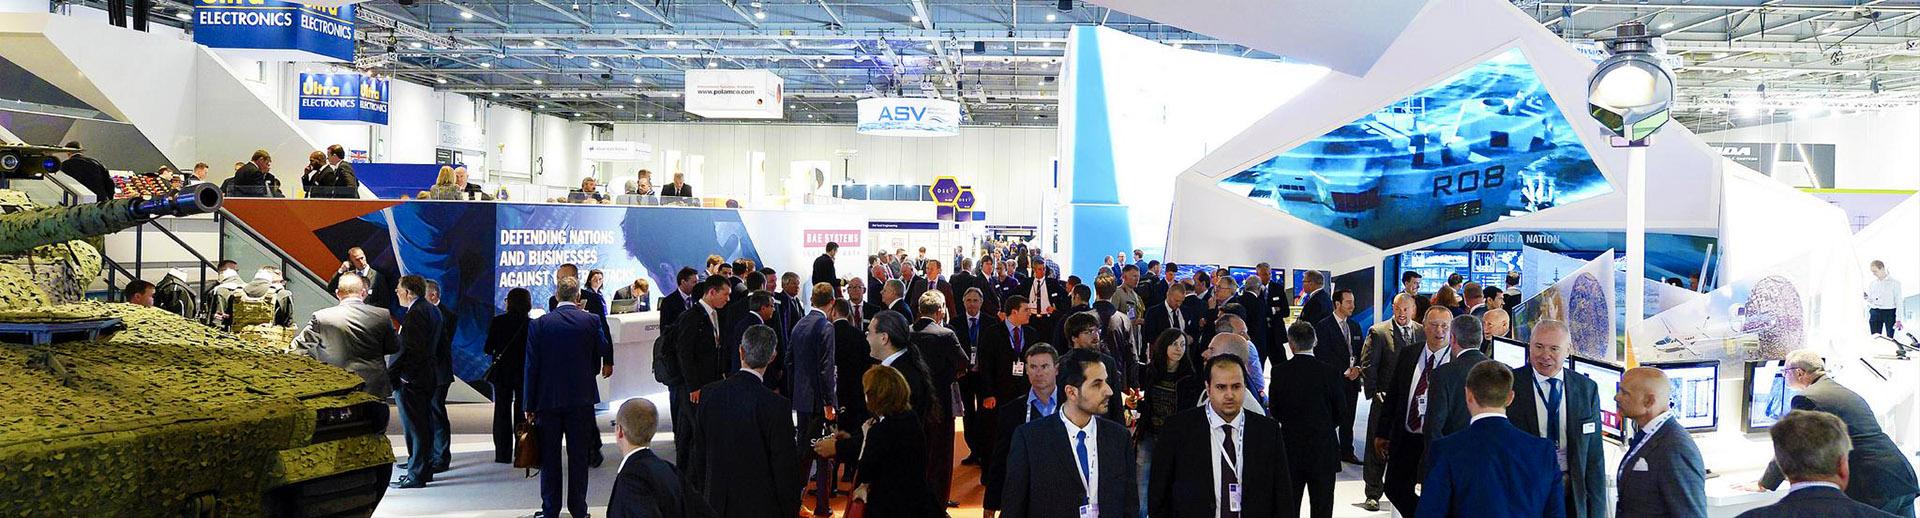 AV and LED Screens Hire for DSEI at ExCeL London